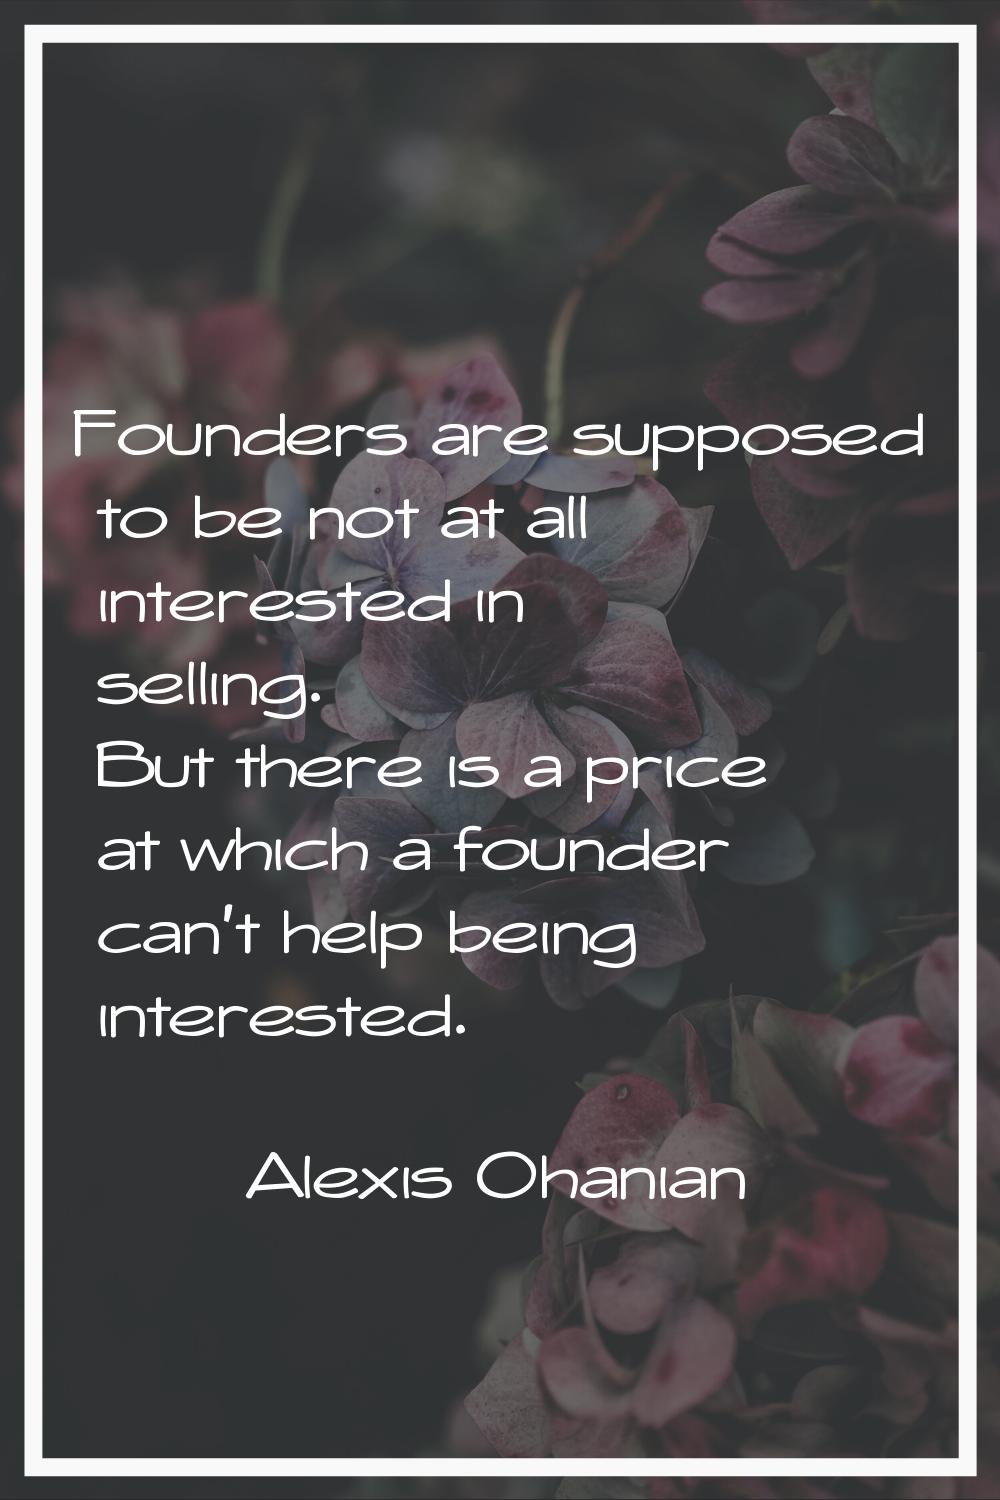 Founders are supposed to be not at all interested in selling. But there is a price at which a found